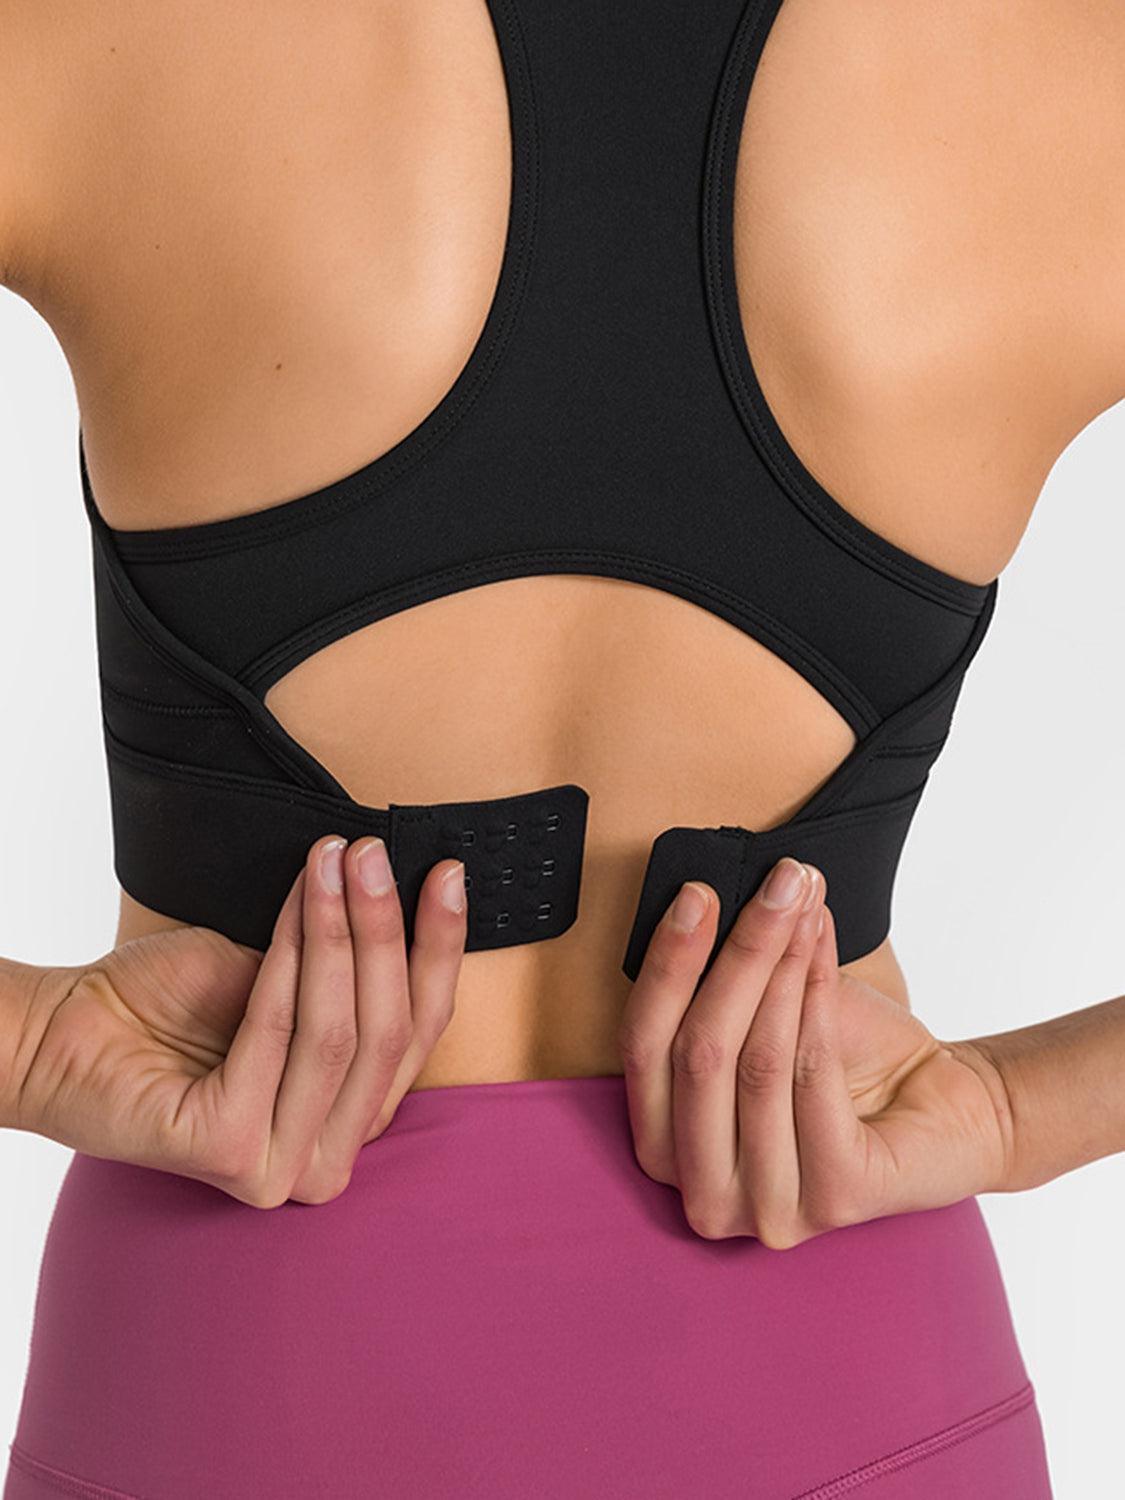 a woman wearing a black sports bra with her hands on her hip